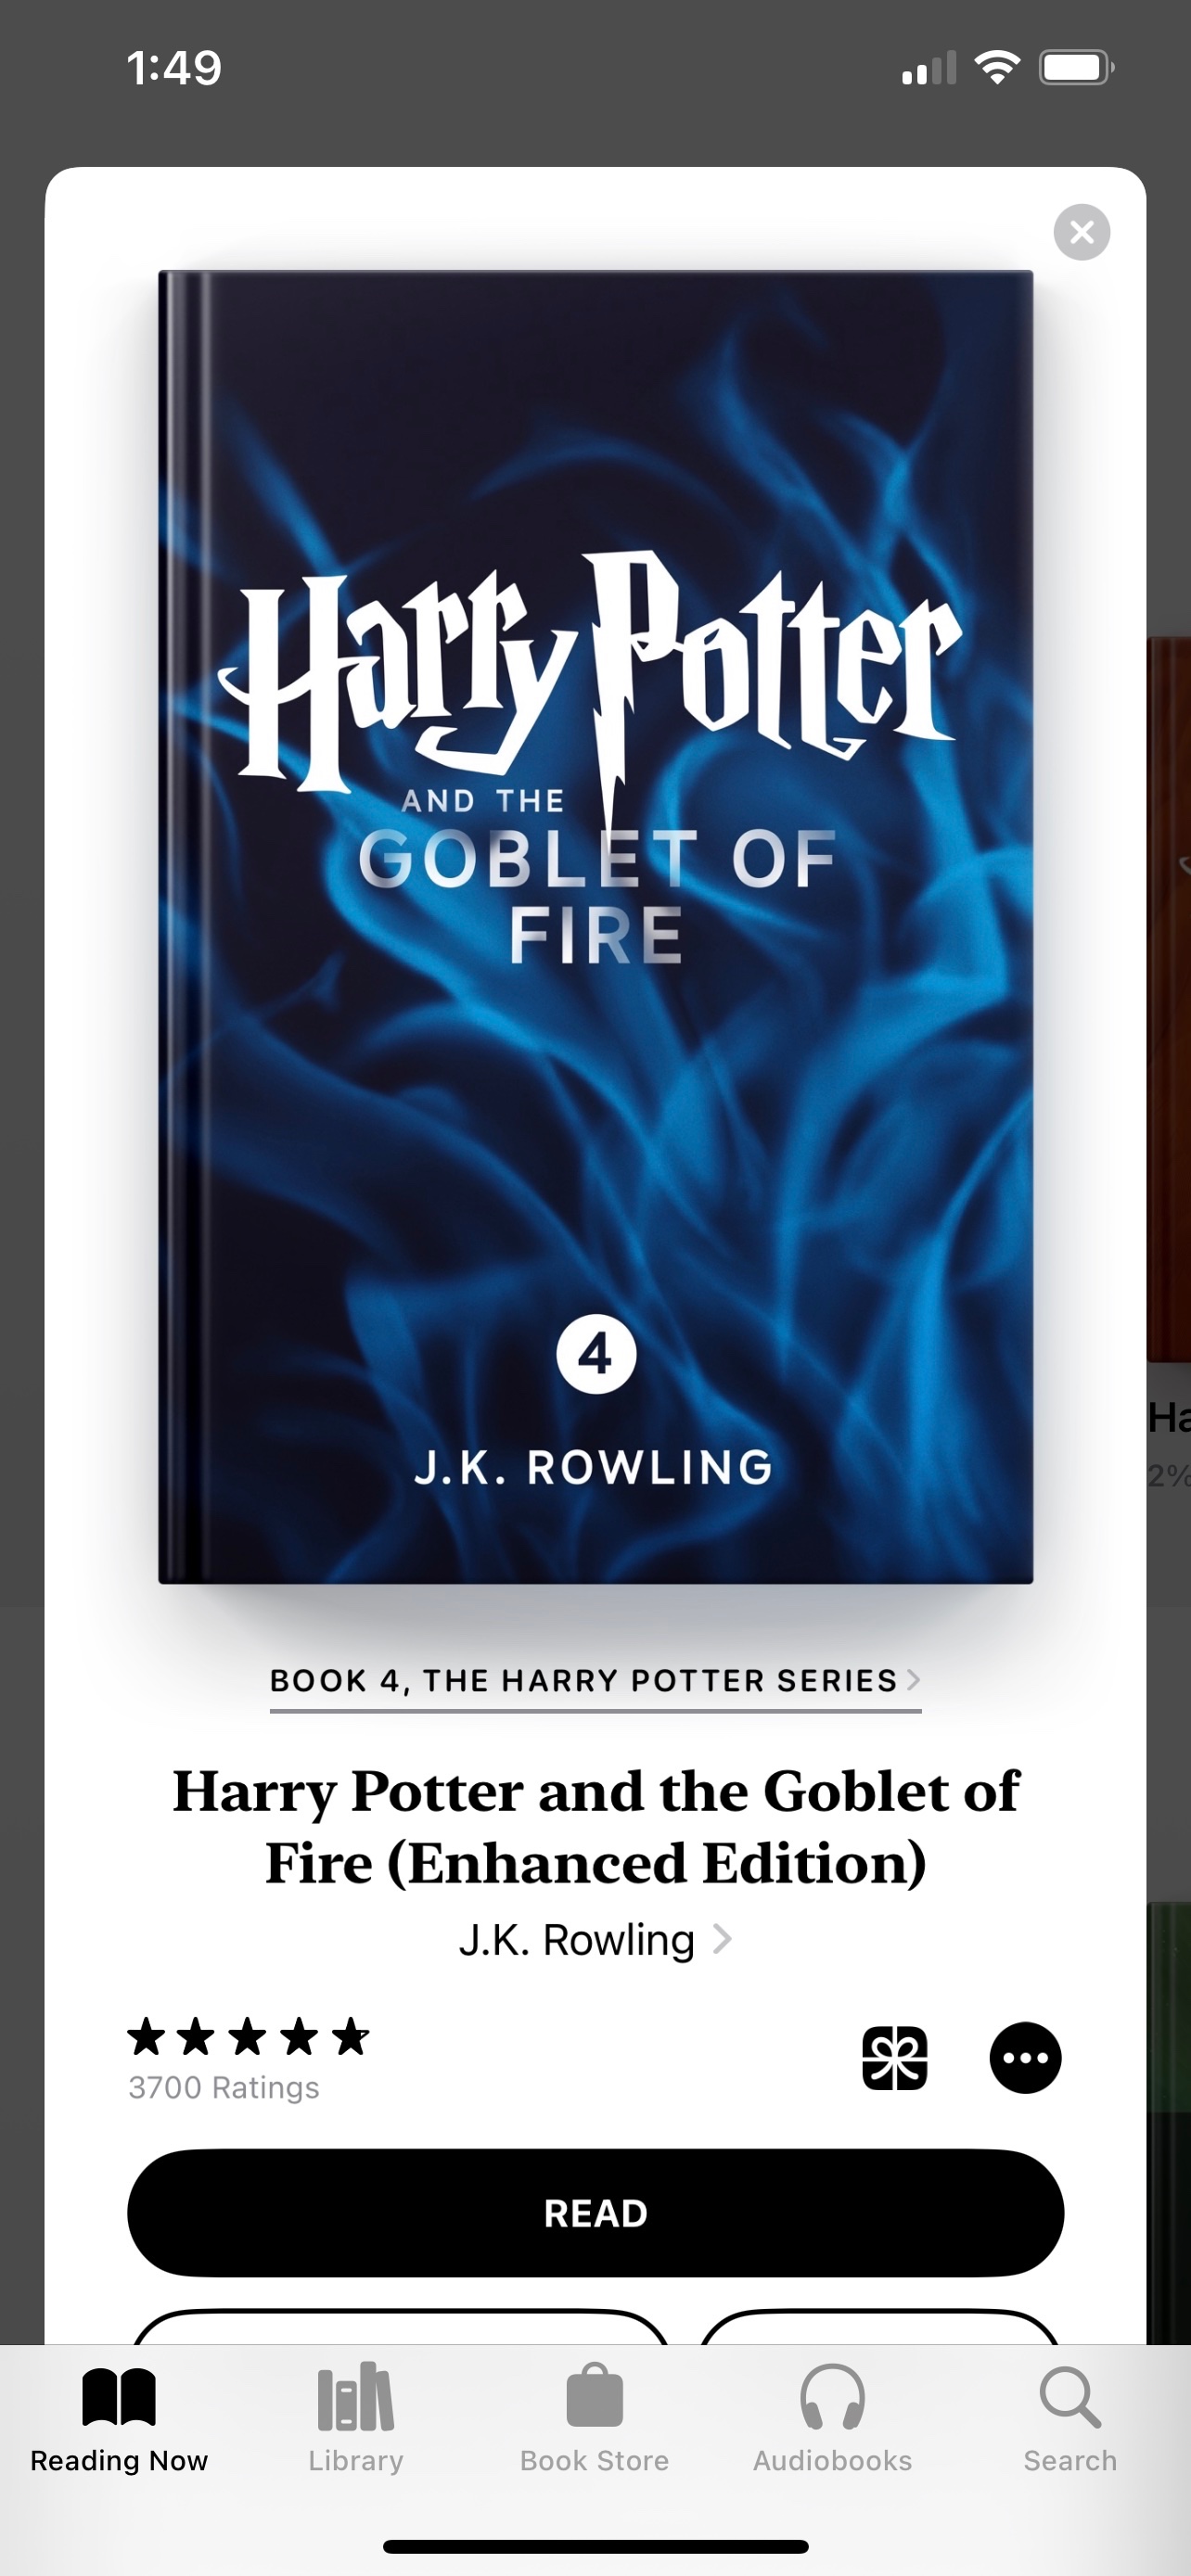 Can I read the Harry Potter books on my Mac device with the Apple Books app? 2